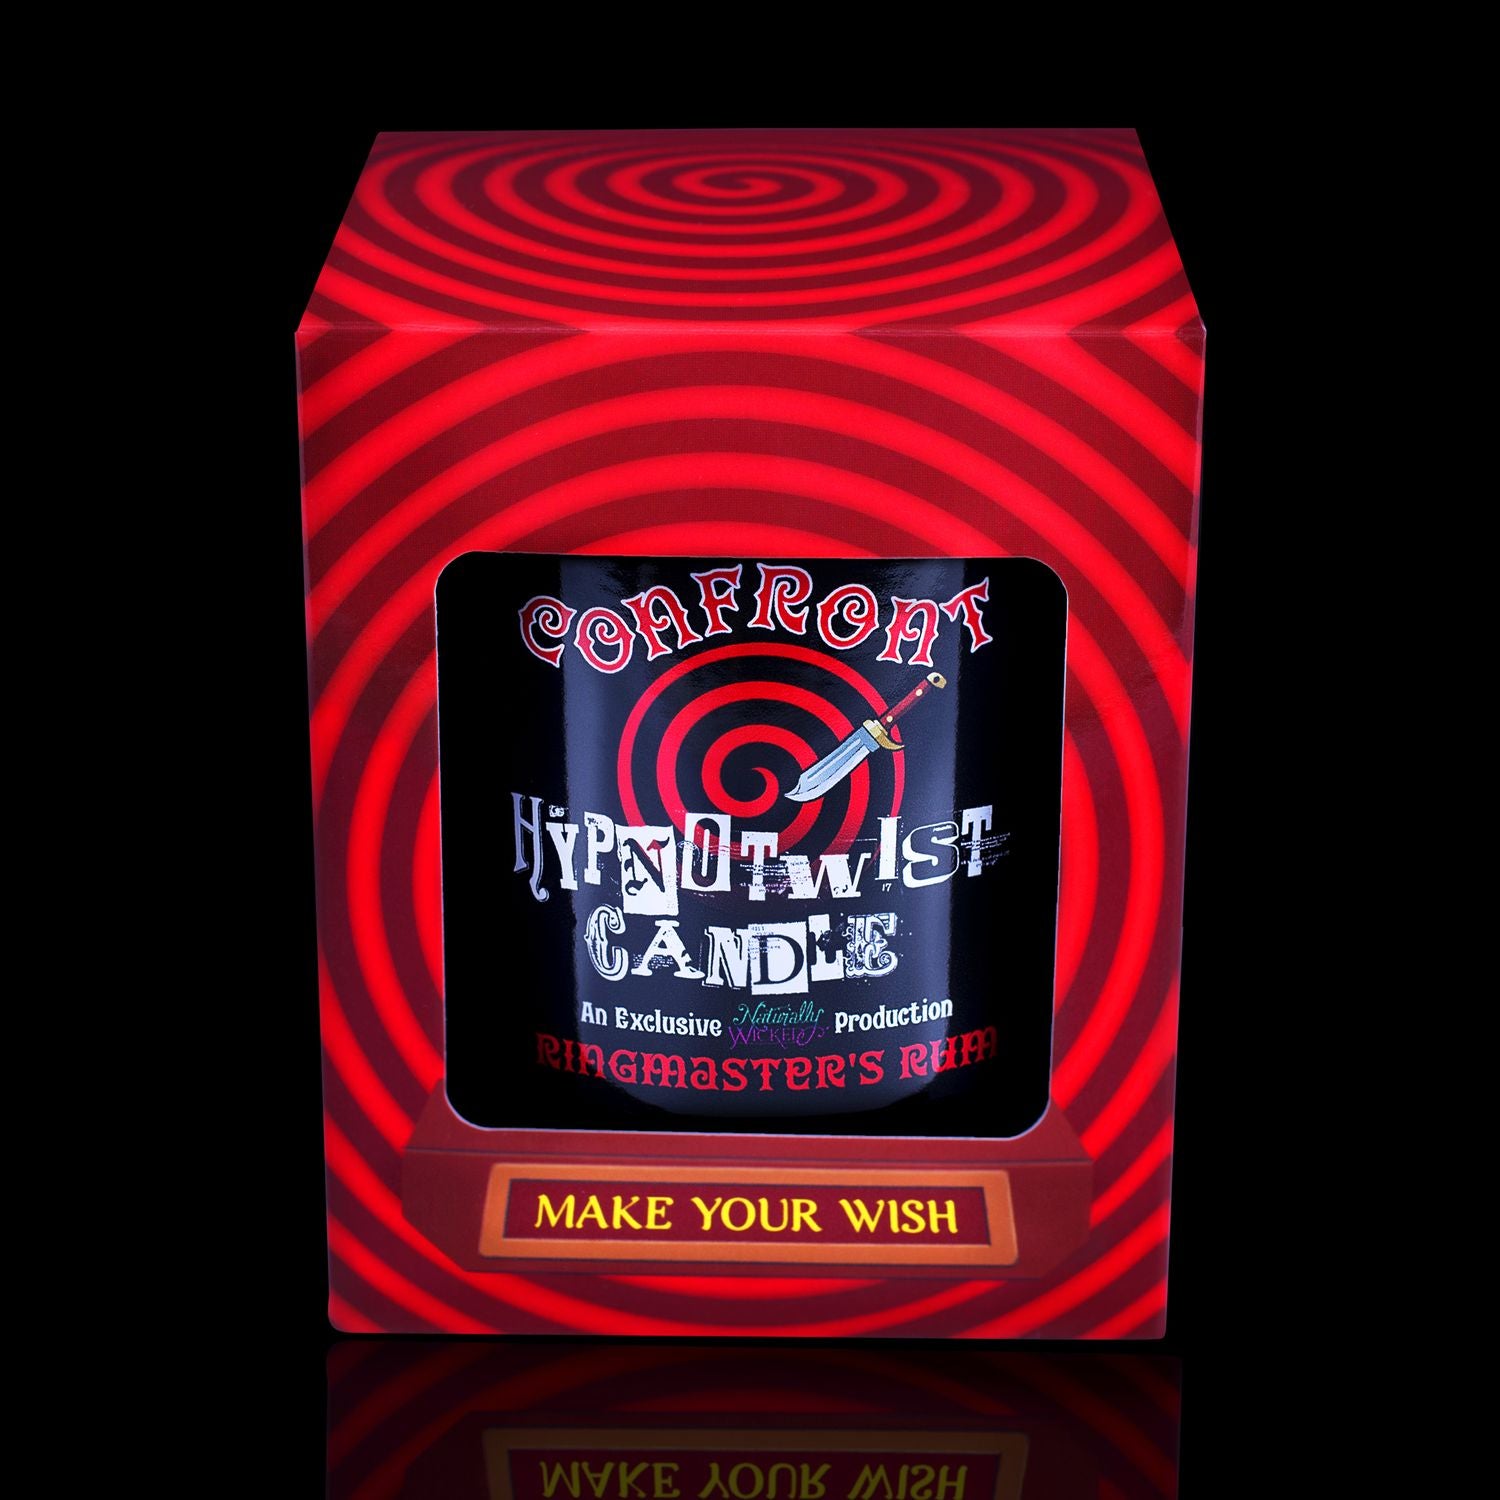 Make Your Wish With The Naturally Wicked Hypnotwist Confront Candle, Plant-based Soy Red Wax Scented With Ringmaster's Rum, Including A Red Jasper Crystal Spinning Top, Mirrored Lid & Red Circus Hypnotic Gift Box